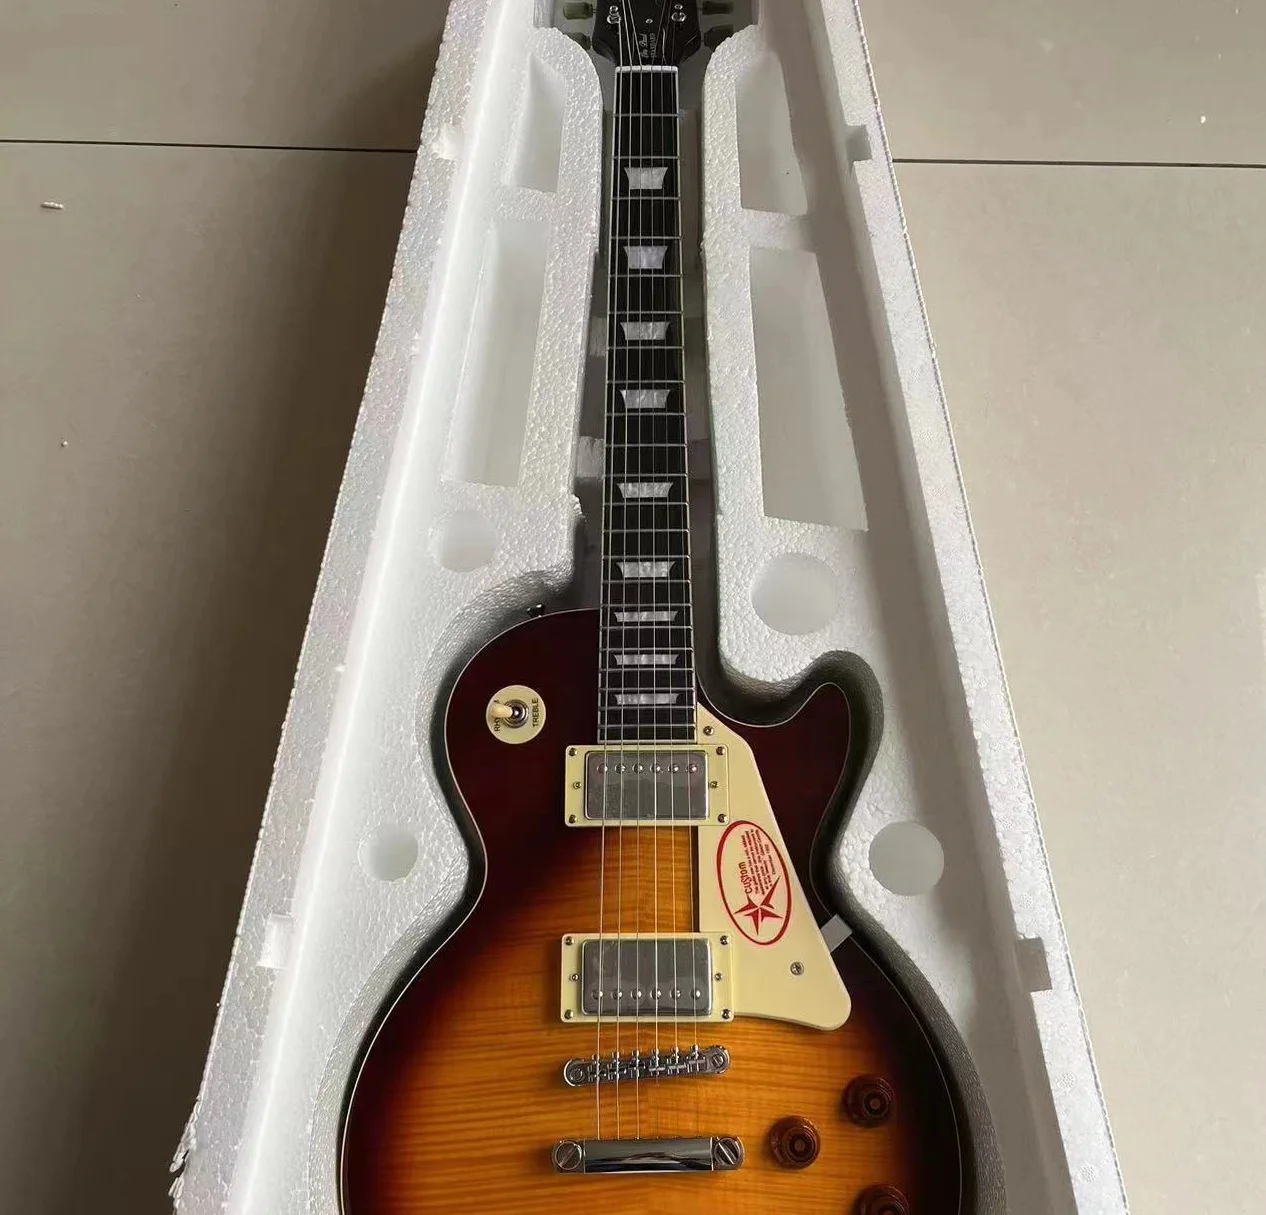 

Relic Electric Guitar Flamed Maple Top 1959 Tribute to Gary Moore Peter Green Smoked Sunburst One Piece Body and Neck EWHGBTREW